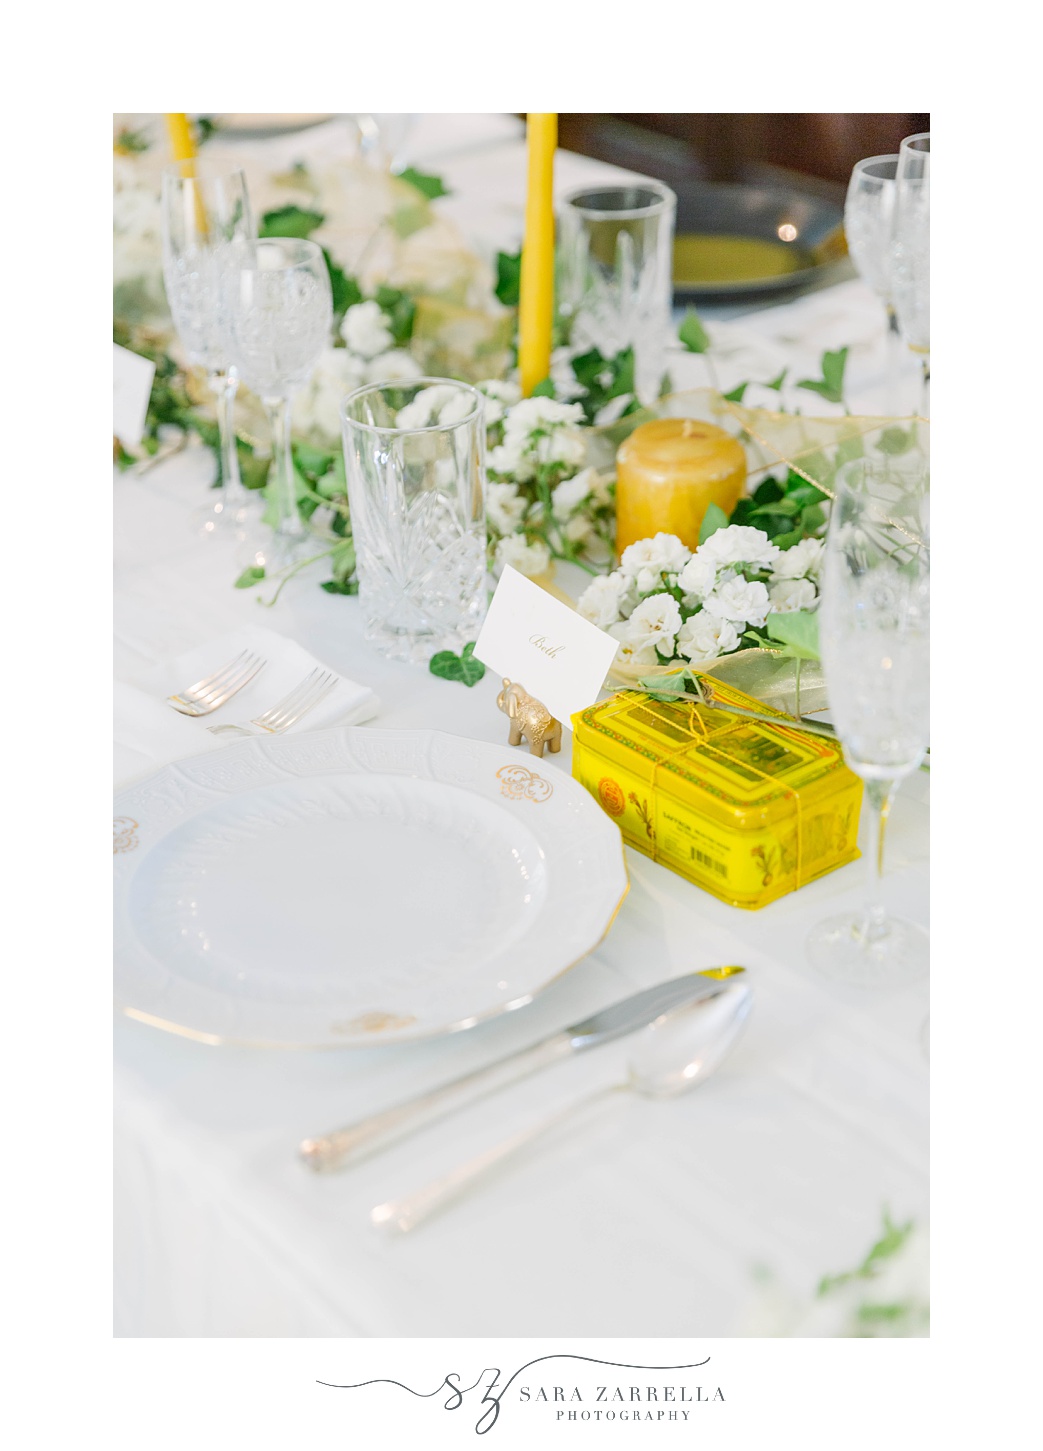 gold and white place settings for MA reception at home 